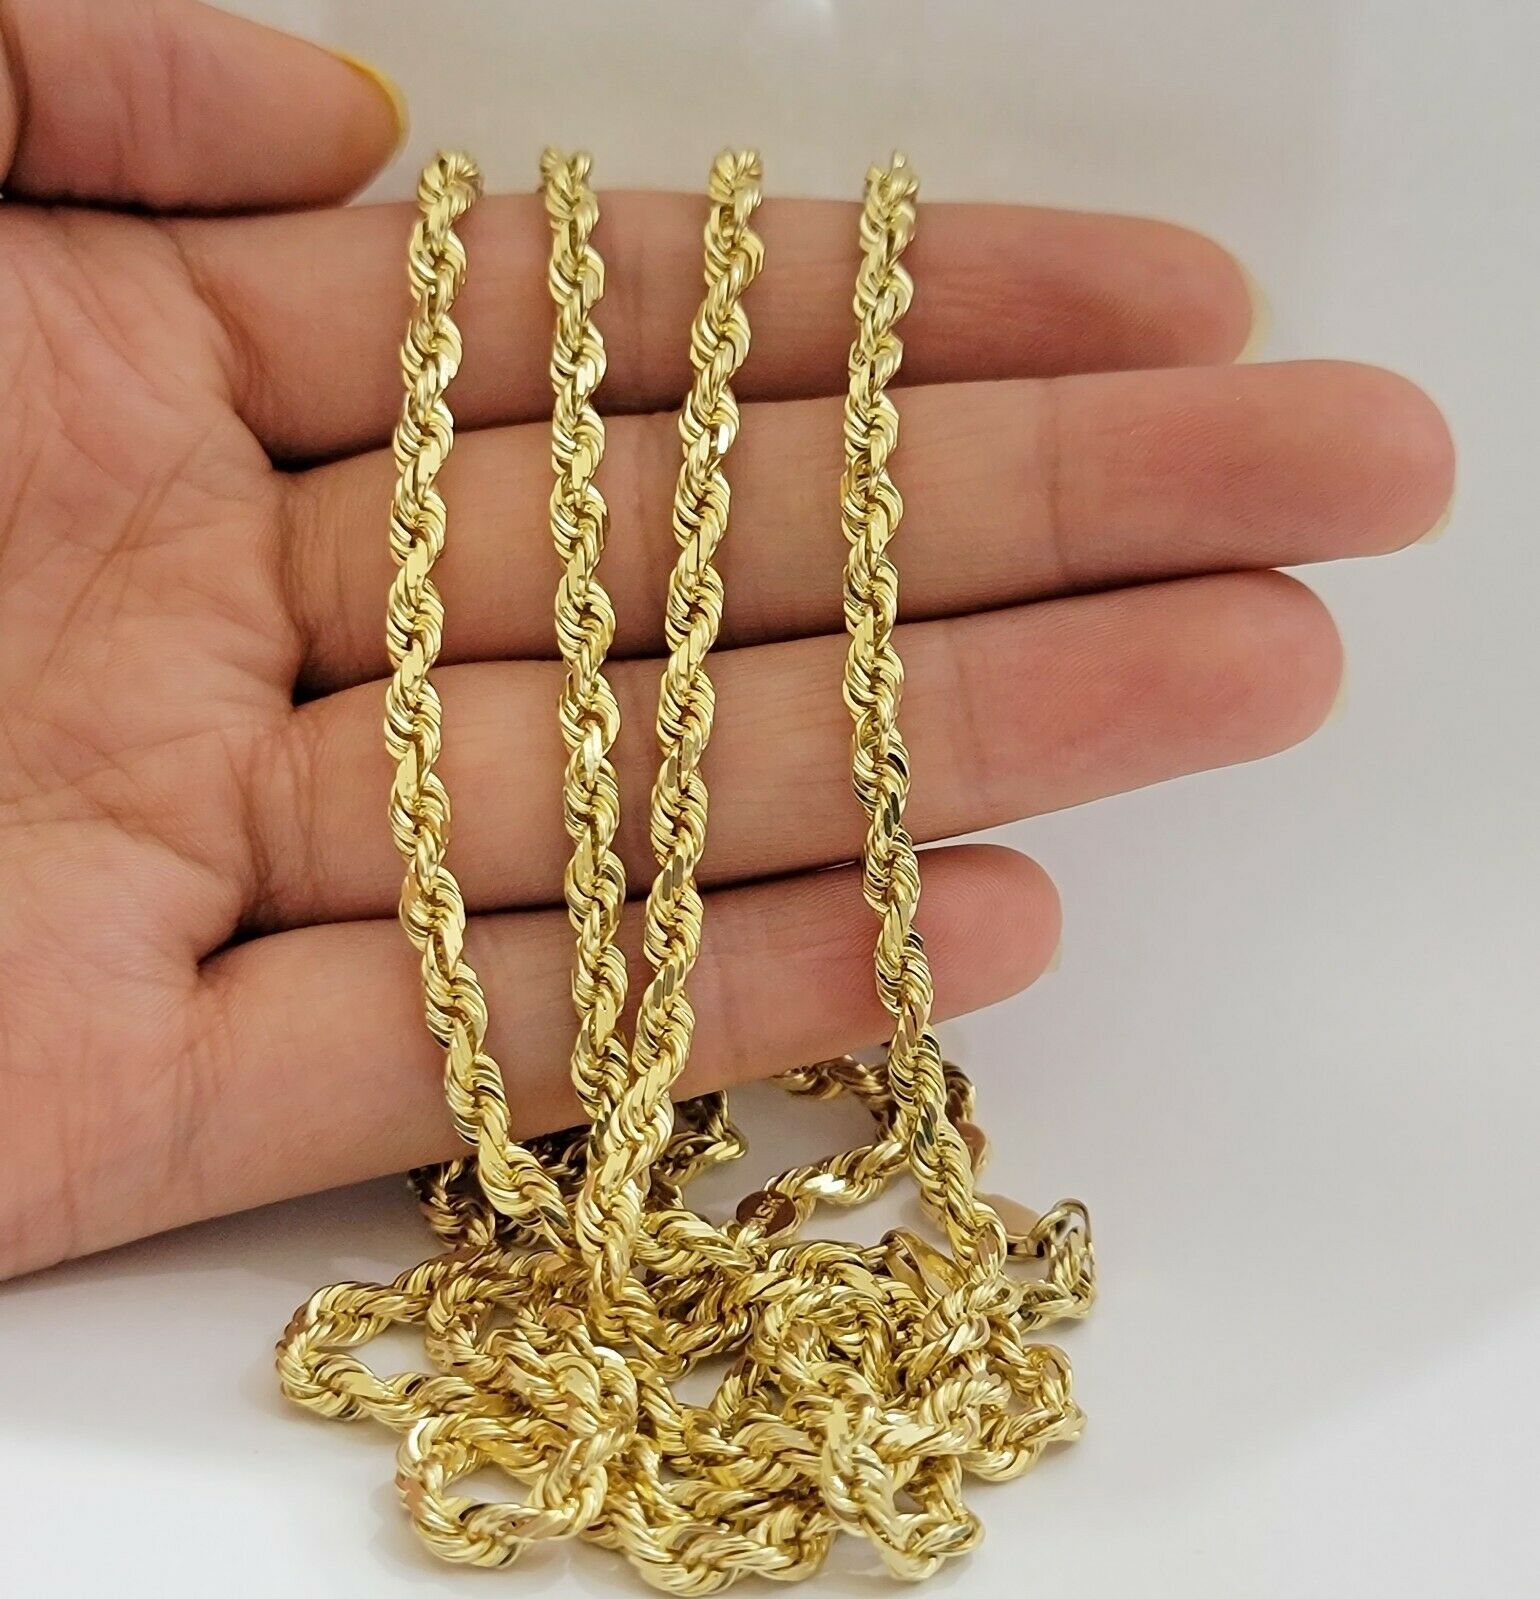 SOLID 10k Yellow Gold Rope Necklace Chain 4mm 18